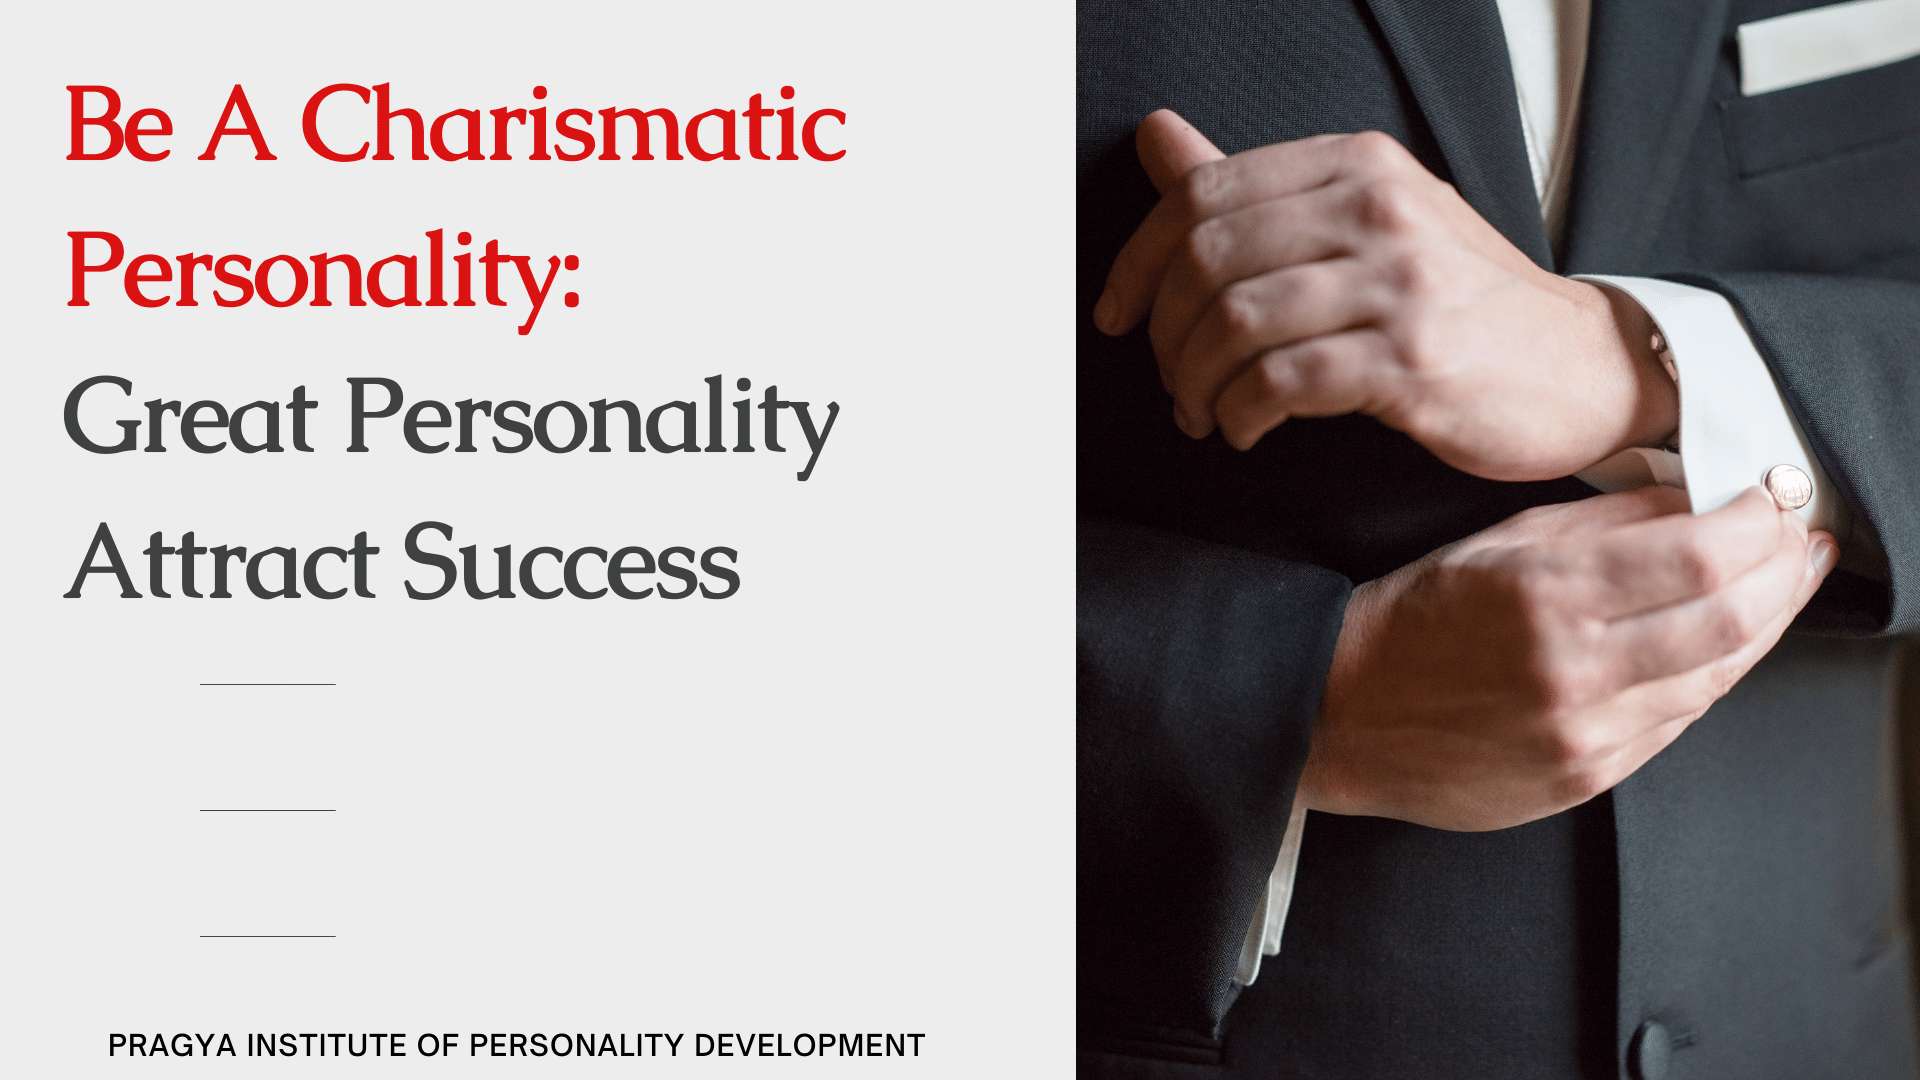 Be A Charismatic Personality: Great Personality Attract Success